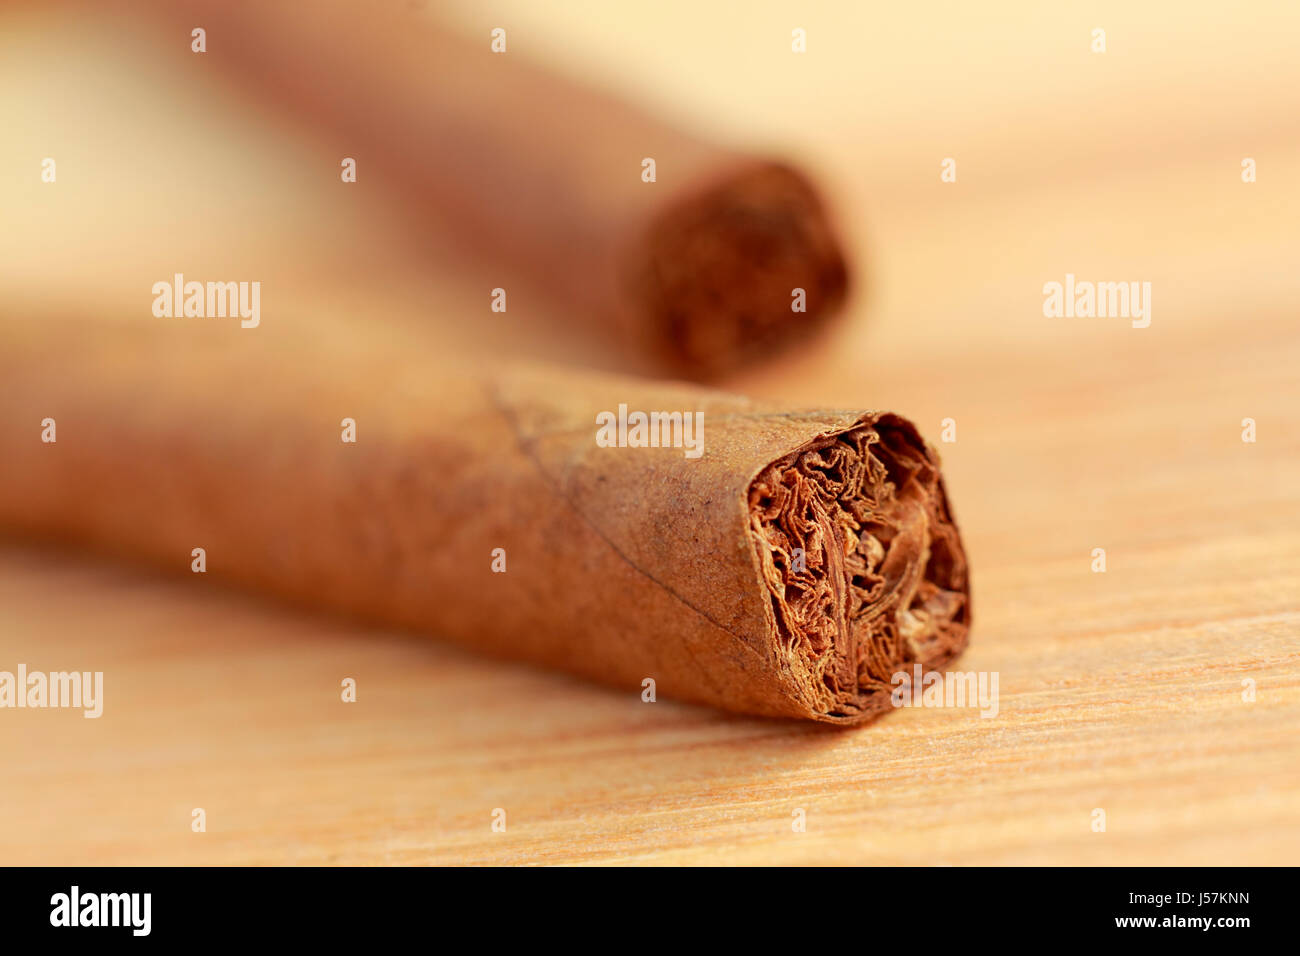 Cigars on wooden board. Close up view. Shallow depth of field. Stock Photo